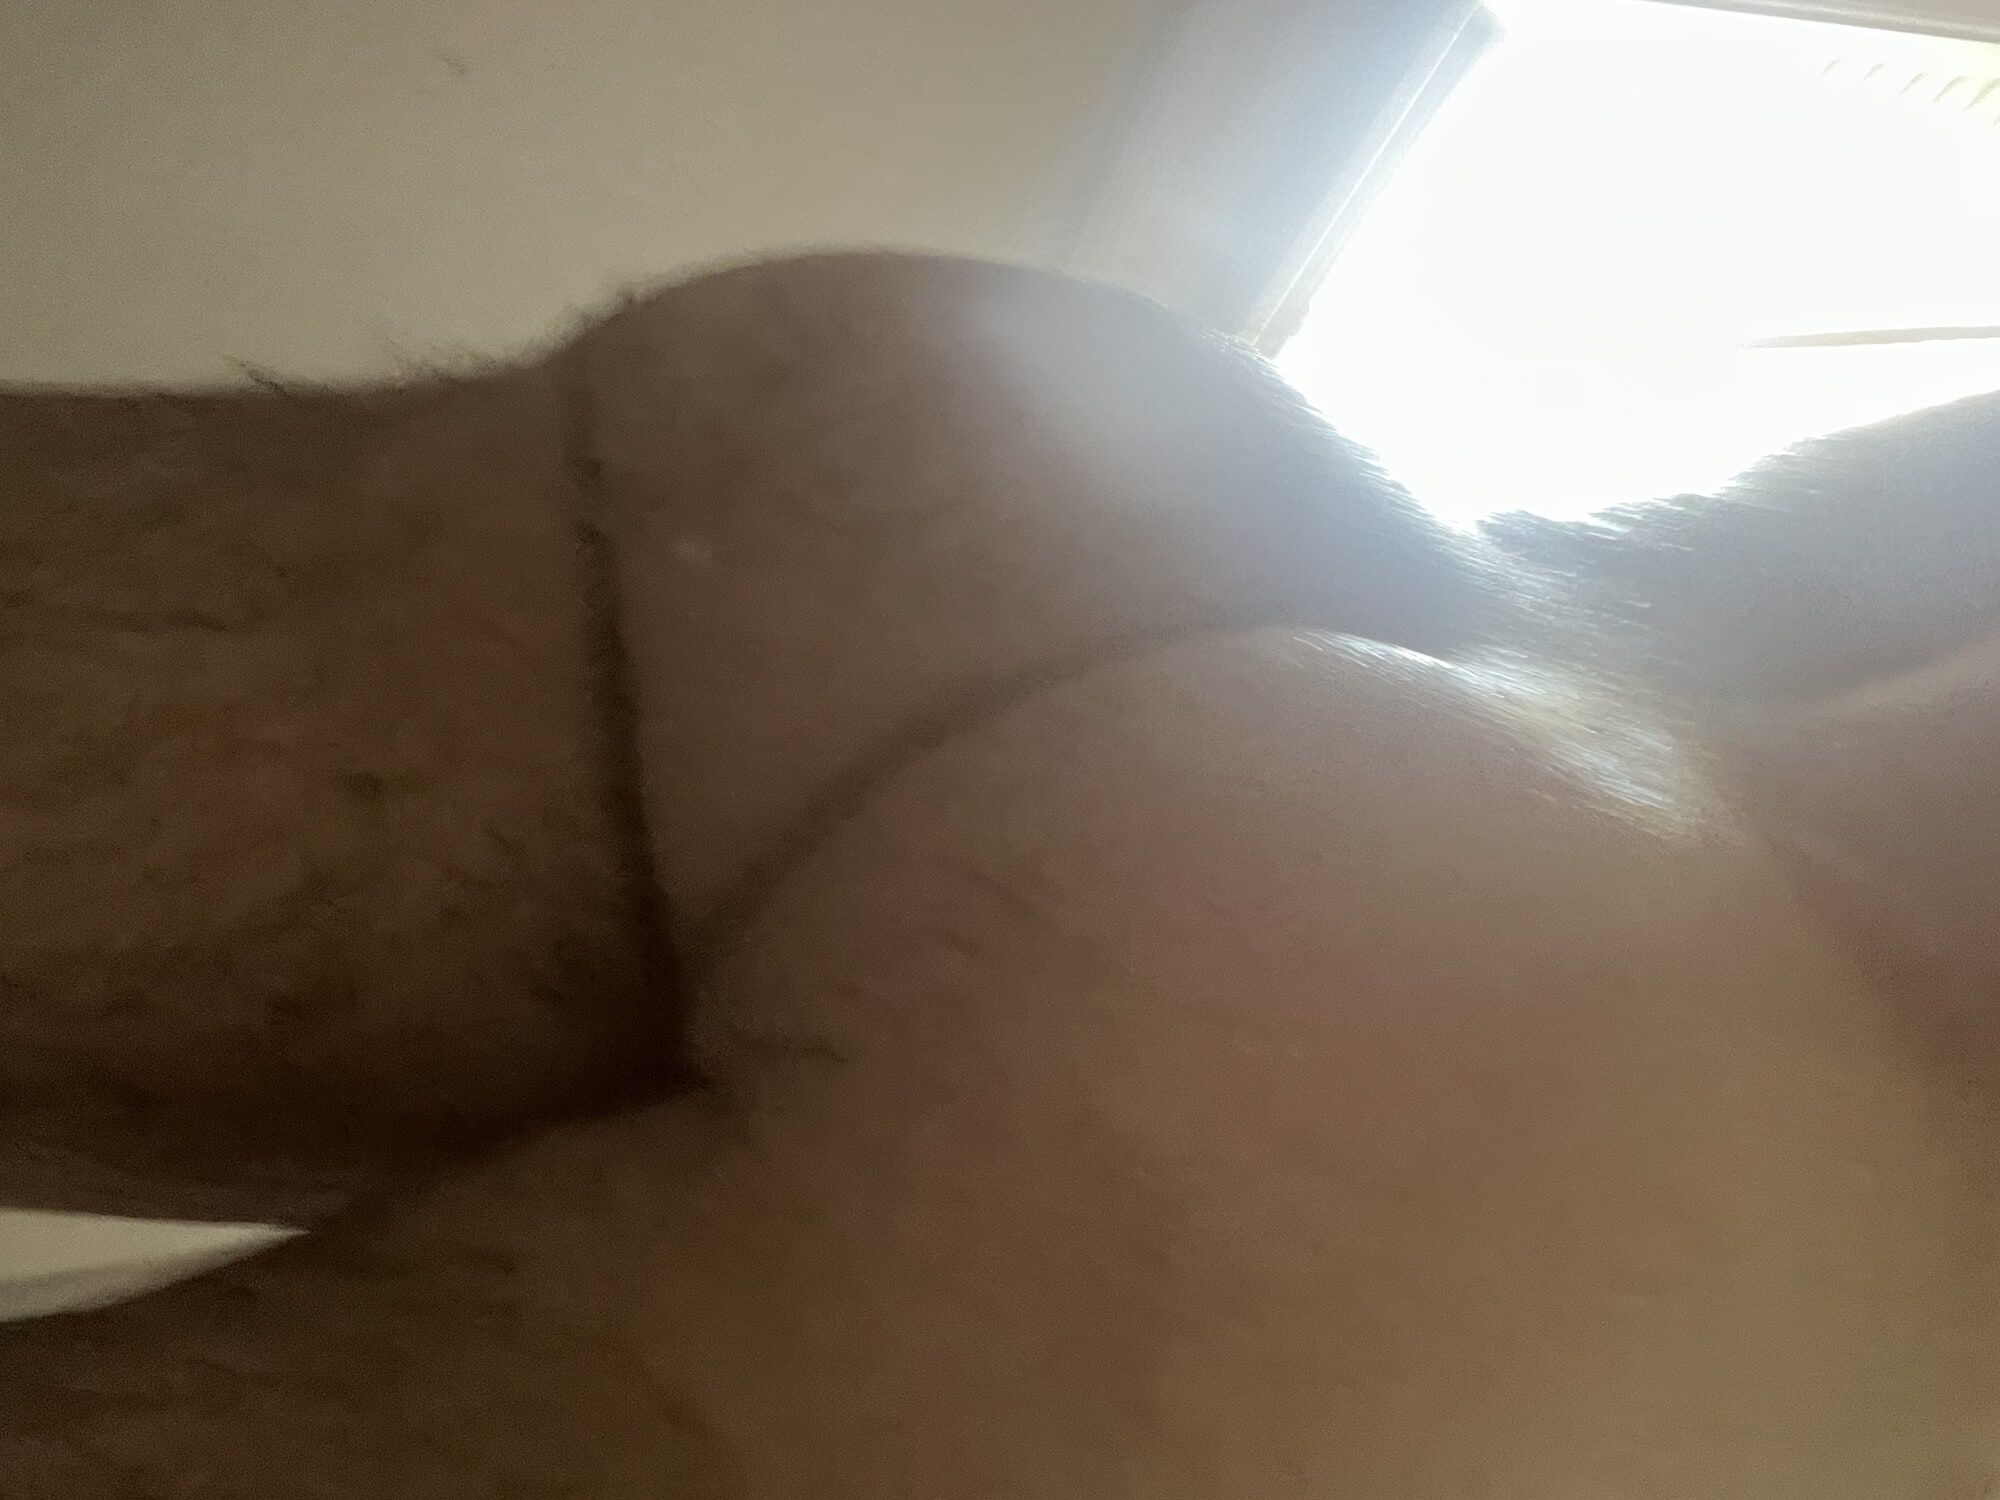 Some fun shots of me cum see #16